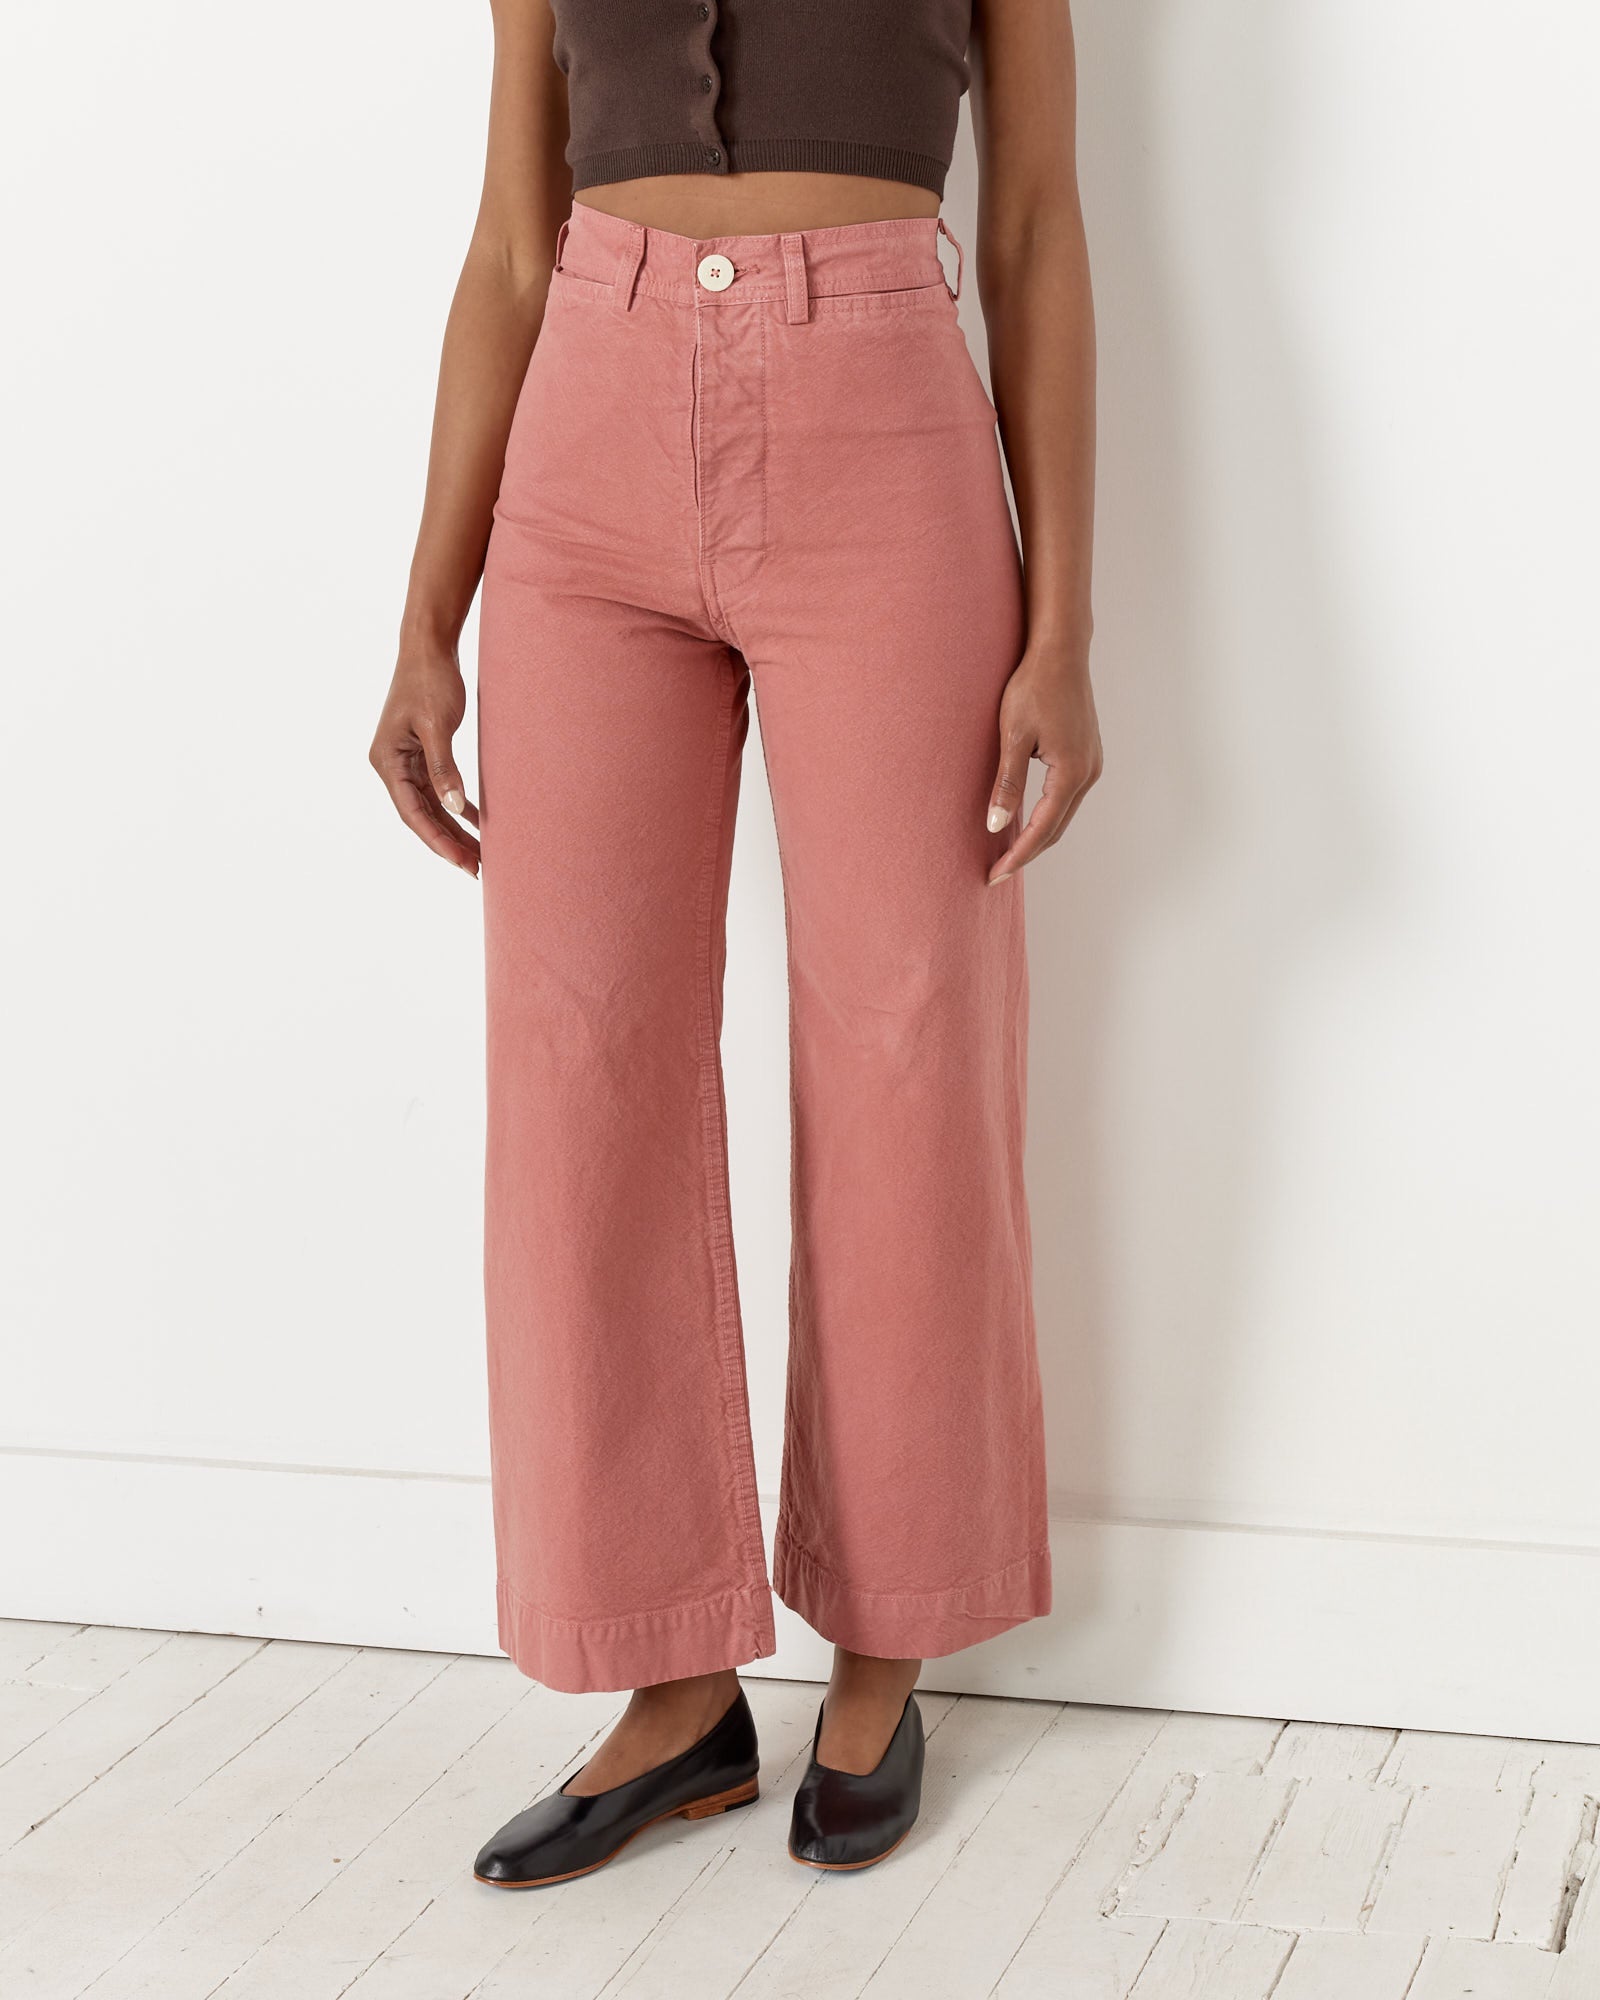 The Sailor Pant in Dogwood